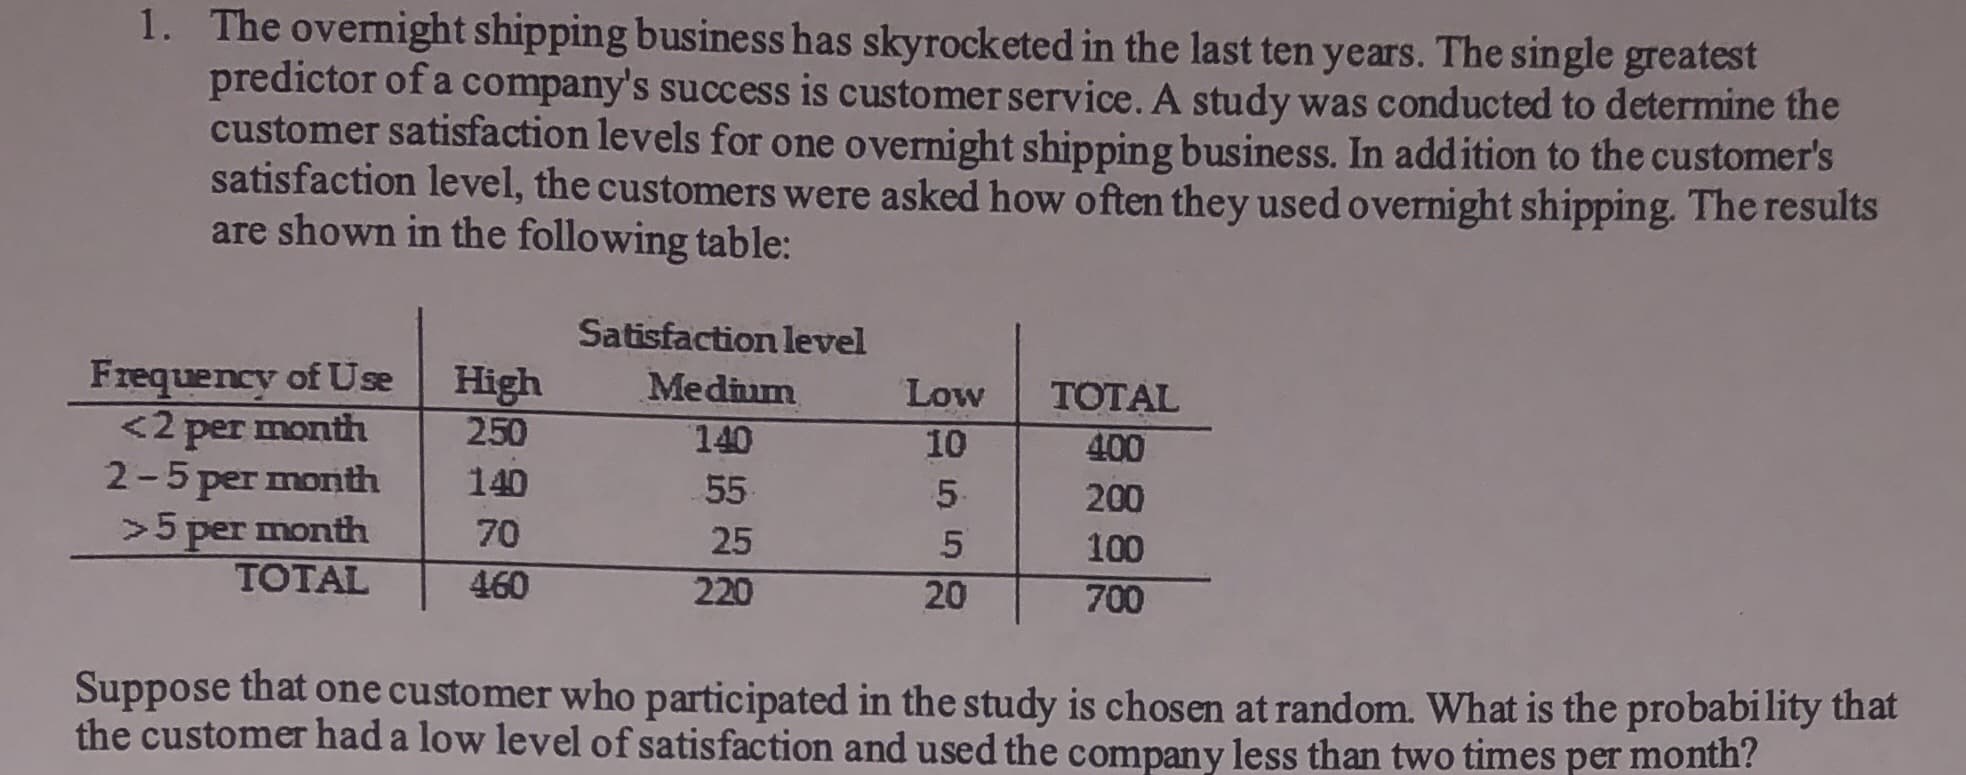 The overnight shipping business has skyrocketed in the last ten years. The single greatest
predictor of a company's success is customer service. A study was conducted to determine the
customer satisfaction levels for one overnight shipping business. In addition to the customer's
satisfaction level, the customers were asked how often they used overnight shipping. The results
are shown in the following table:
1.
Satisfaction level
Frequency of Use
<2 per month
2-5 per month
High
250
Medium
TOTAL
Low
400
140
10
55
5.
140
200
>5 per month
TOTAL
100
70
25
220
460
20
700
Suppose that one customer who participated in the study is chosen at random. What is the probability that
the customer had a low level of satisfaction and used the company less than two times per month?
